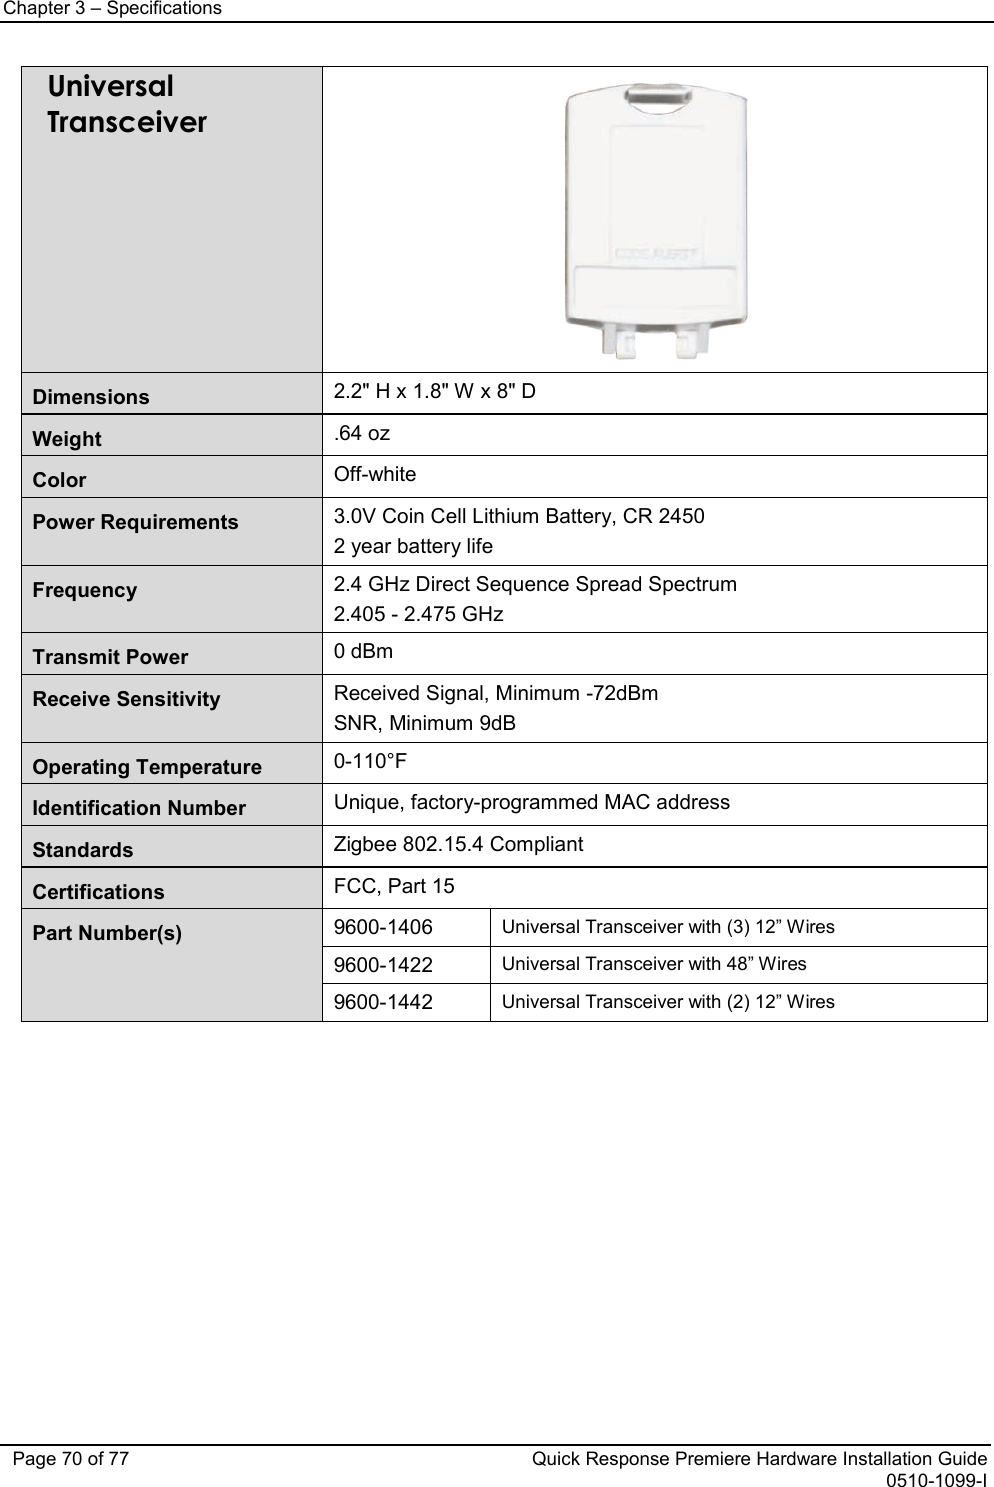 Chapter 3 – Specifications   Page 70 of 77 Quick Response Premiere Hardware Installation Guide 0510-1099-I Universal Transceiver  Dimensions 2.2&quot; H x 1.8&quot; W x 8&quot; D Weight .64 oz Color Off-white Power Requirements 3.0V Coin Cell Lithium Battery, CR 2450 2 year battery life Frequency  2.4 GHz Direct Sequence Spread Spectrum 2.405 - 2.475 GHz Transmit Power 0 dBm Receive Sensitivity Received Signal, Minimum -72dBm SNR, Minimum 9dB Operating Temperature 0-110°F Identification Number Unique, factory-programmed MAC address Standards Zigbee 802.15.4 Compliant Certifications FCC, Part 15 Part Number(s)  9600-1406 Universal Transceiver with (3) 12” Wires 9600-1422 Universal Transceiver with 48” Wires 9600-1442 Universal Transceiver with (2) 12” Wires           